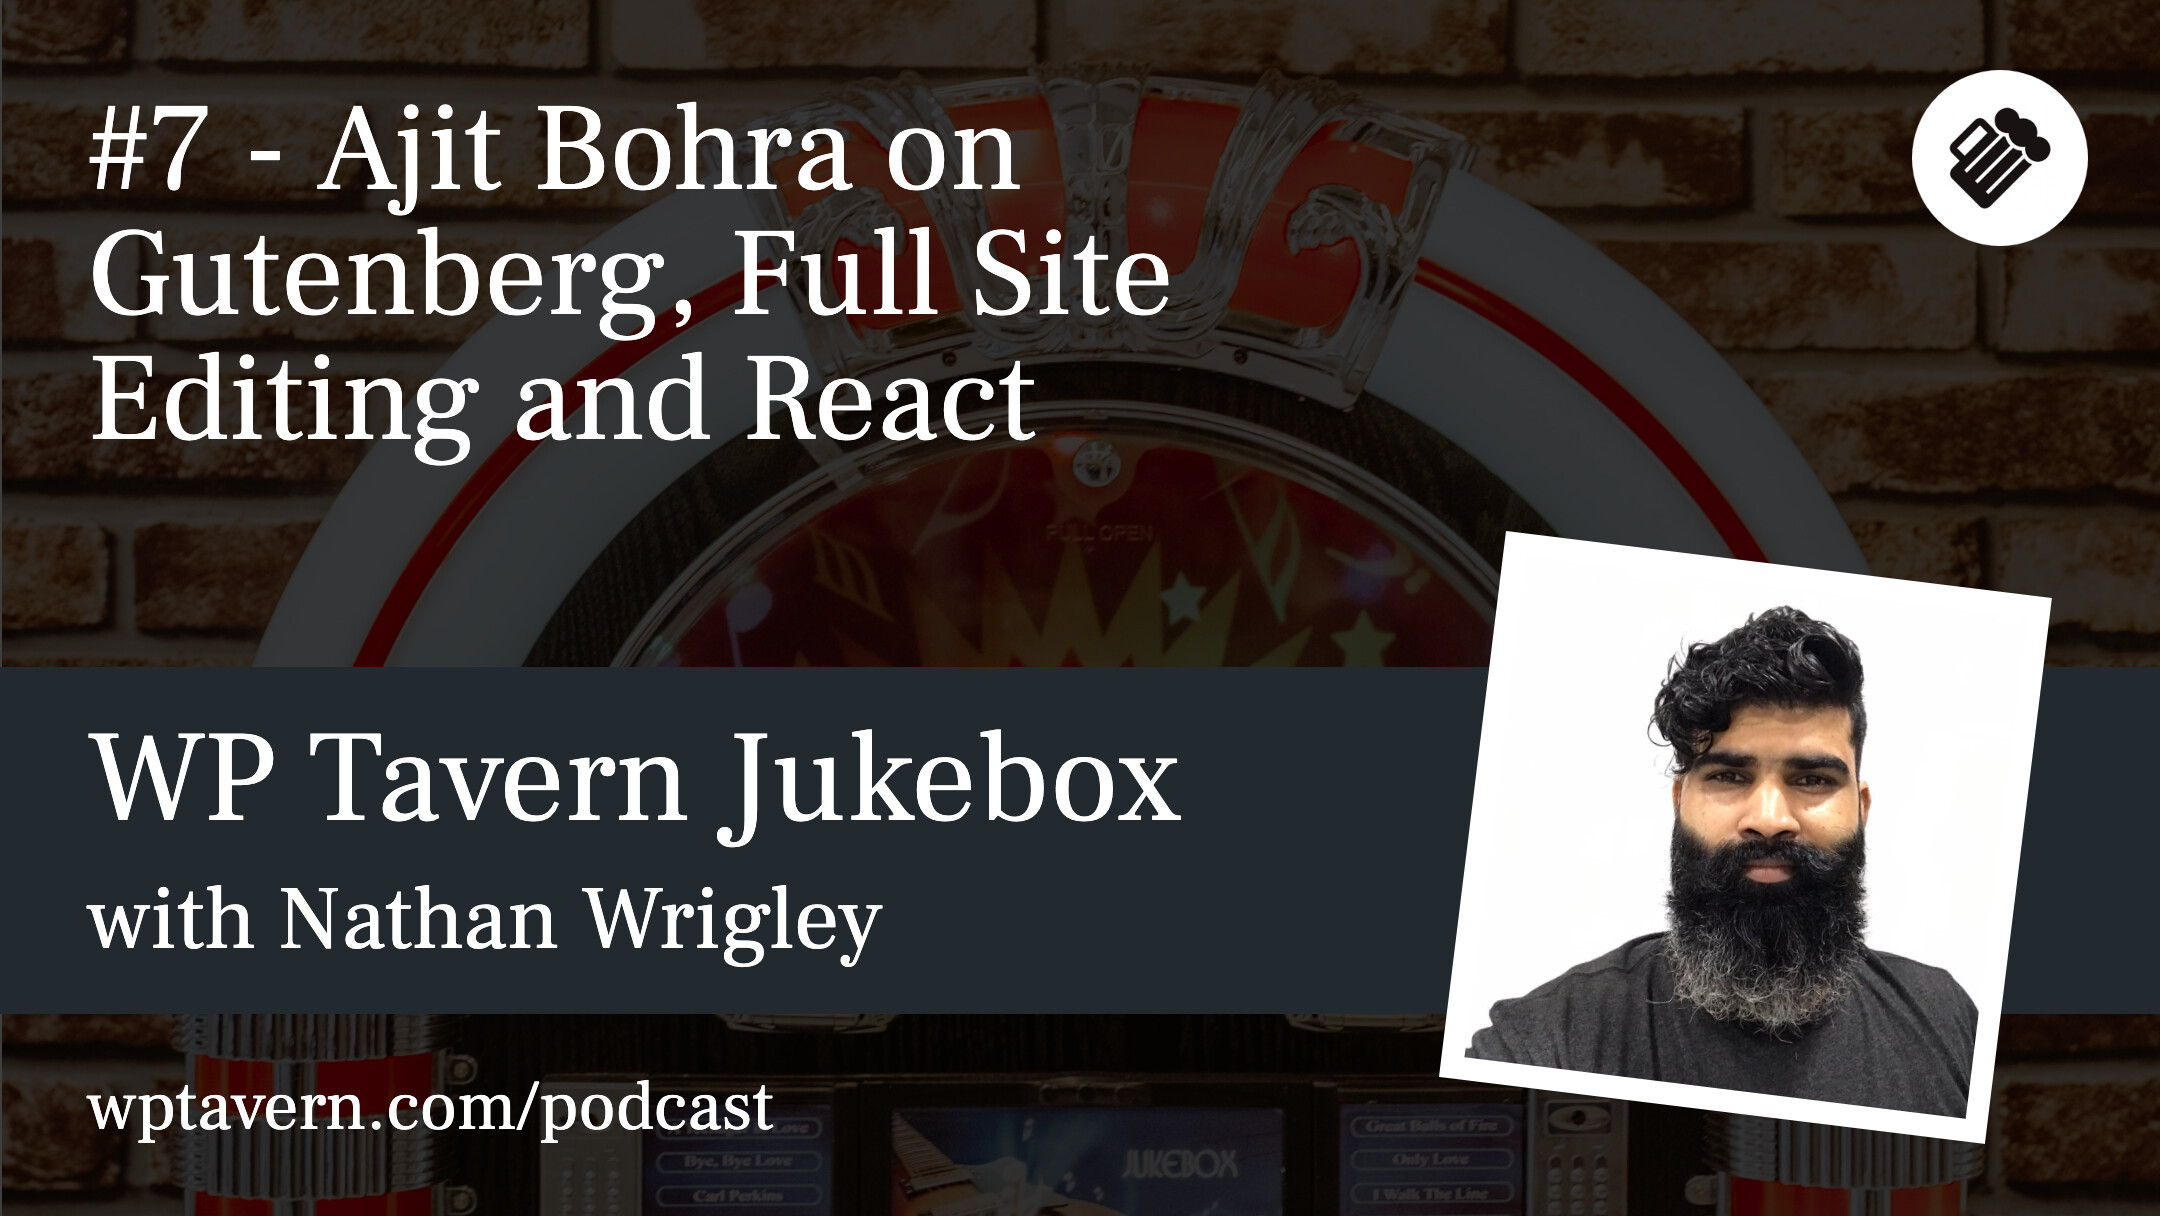 #7 - Ajit Bohra on Gutenberg, Full Site Editing and React